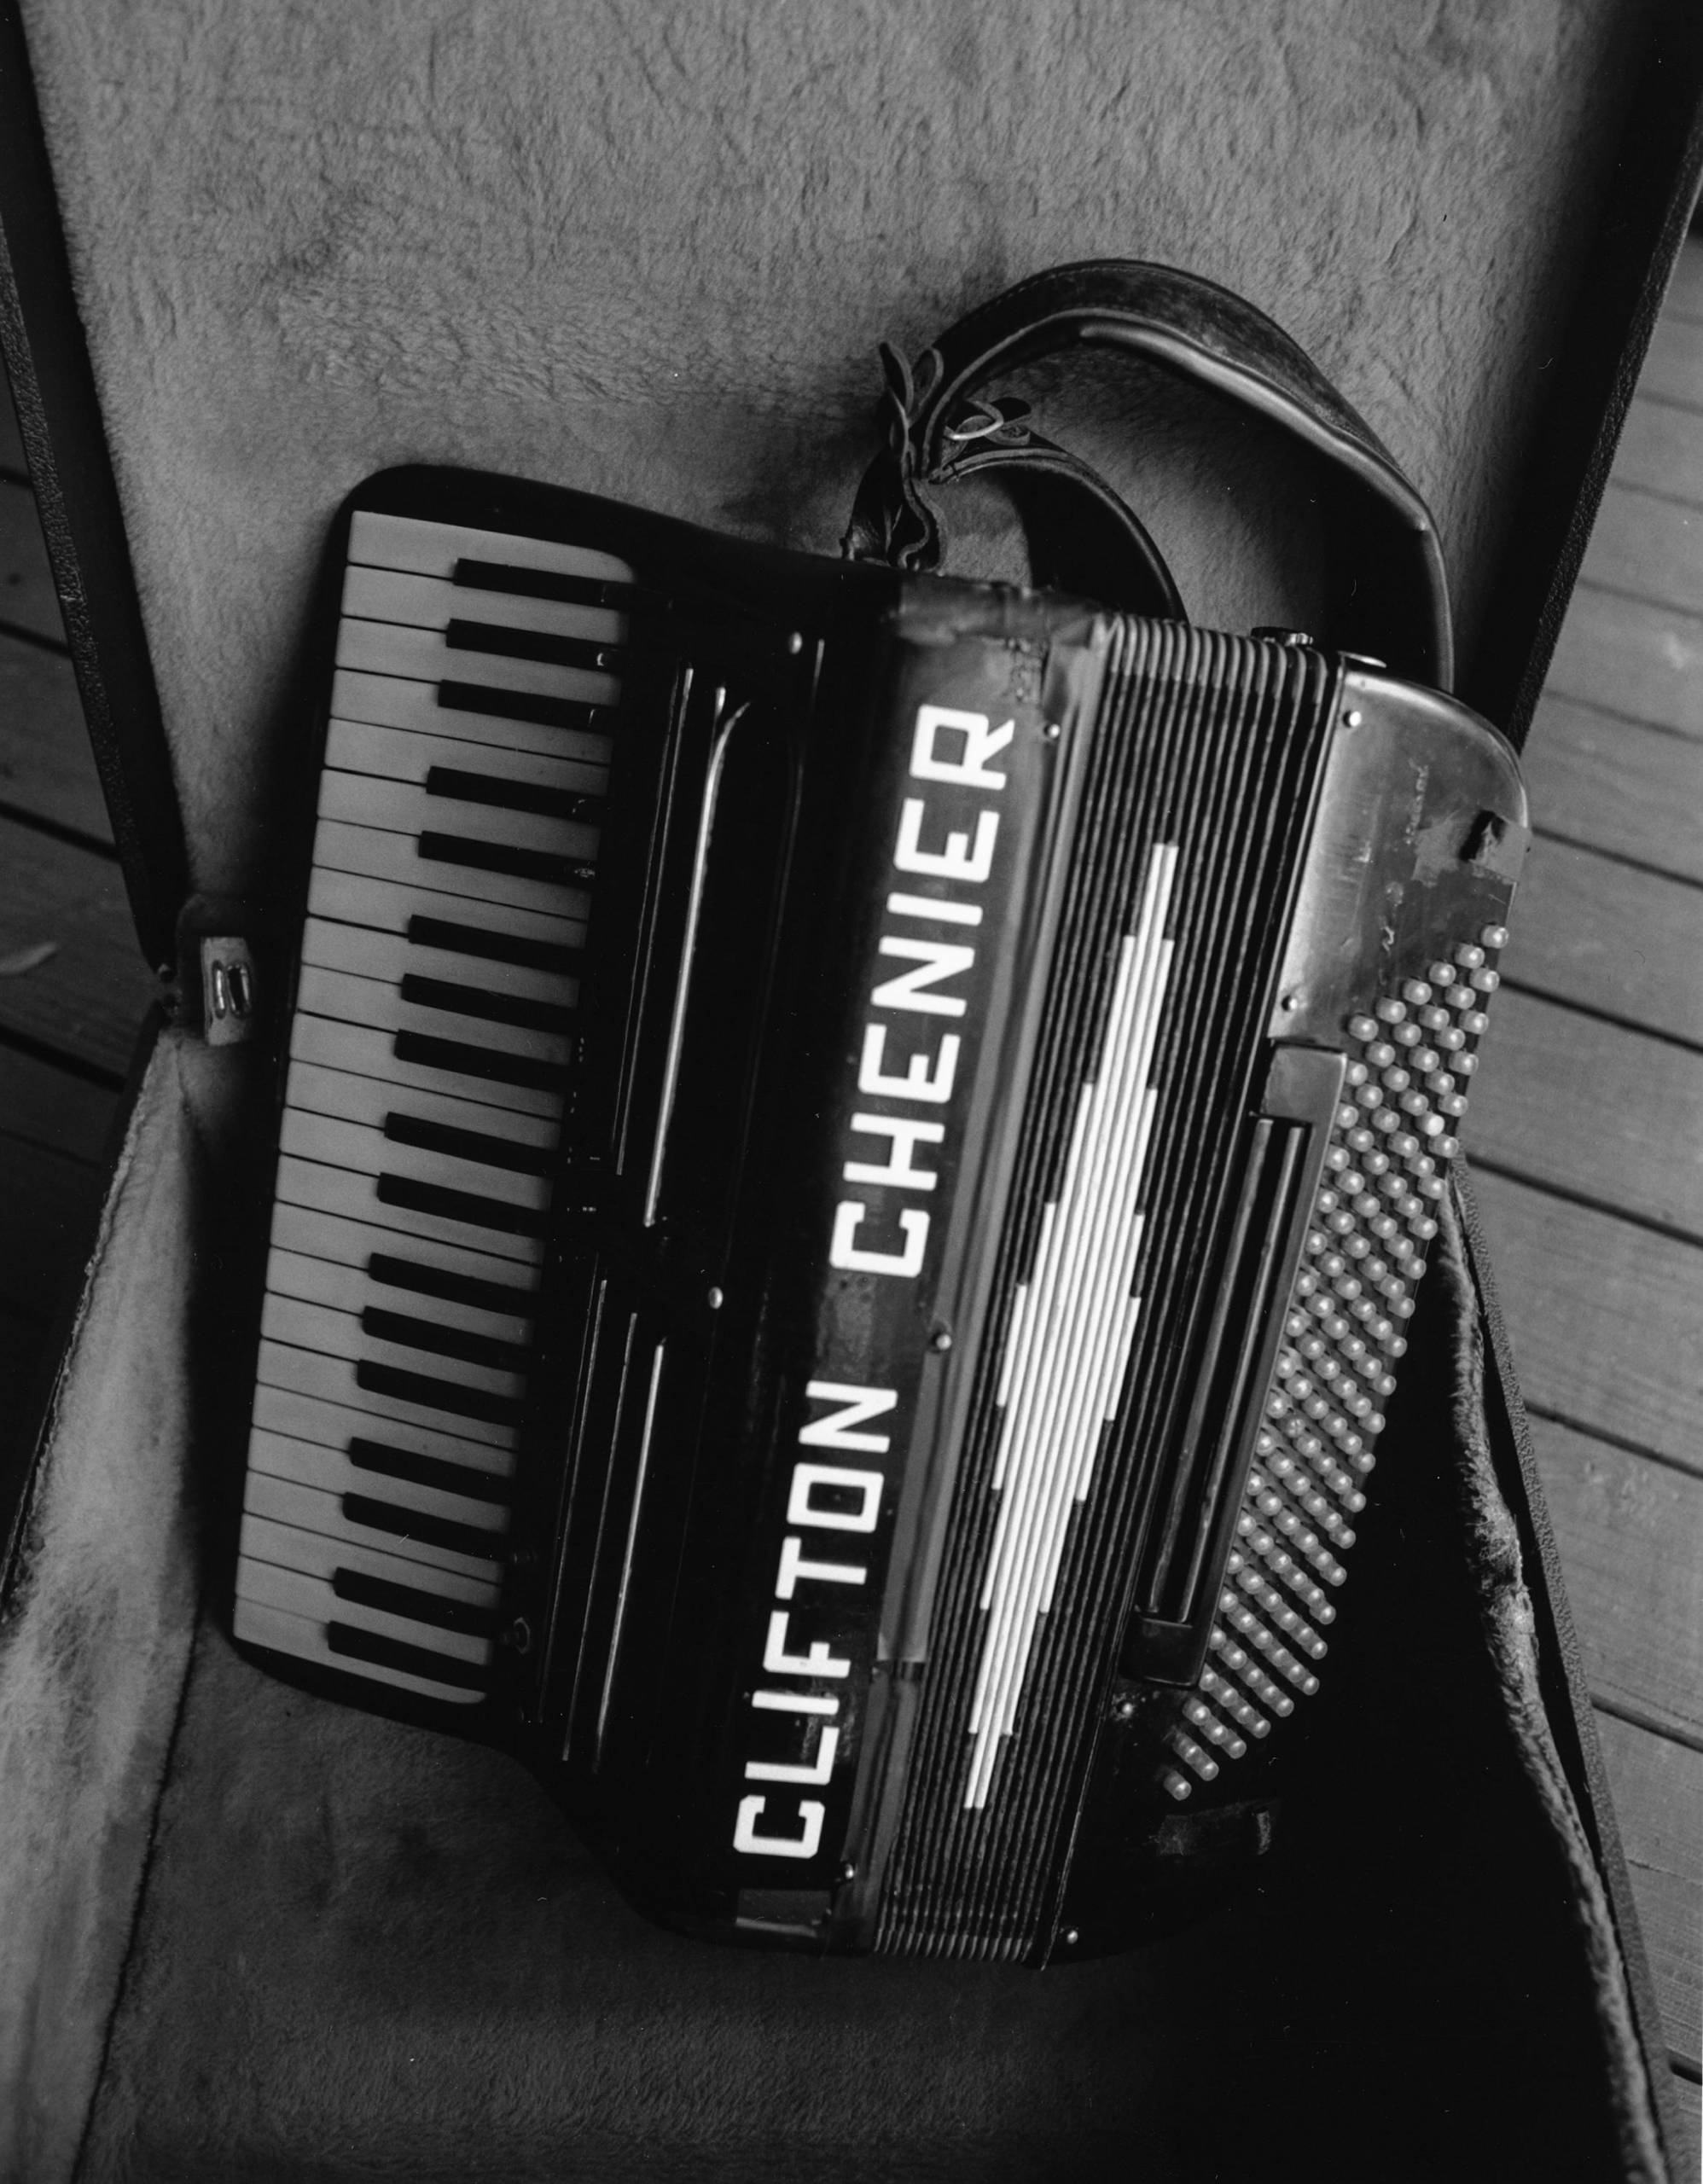 Clifton Chenier's Accordion (Photograph by James Fraher, from the books "Texas Zydeco" and "Down in Houston: Bayou City Blues" by Roger Wood, University of Texas Press)